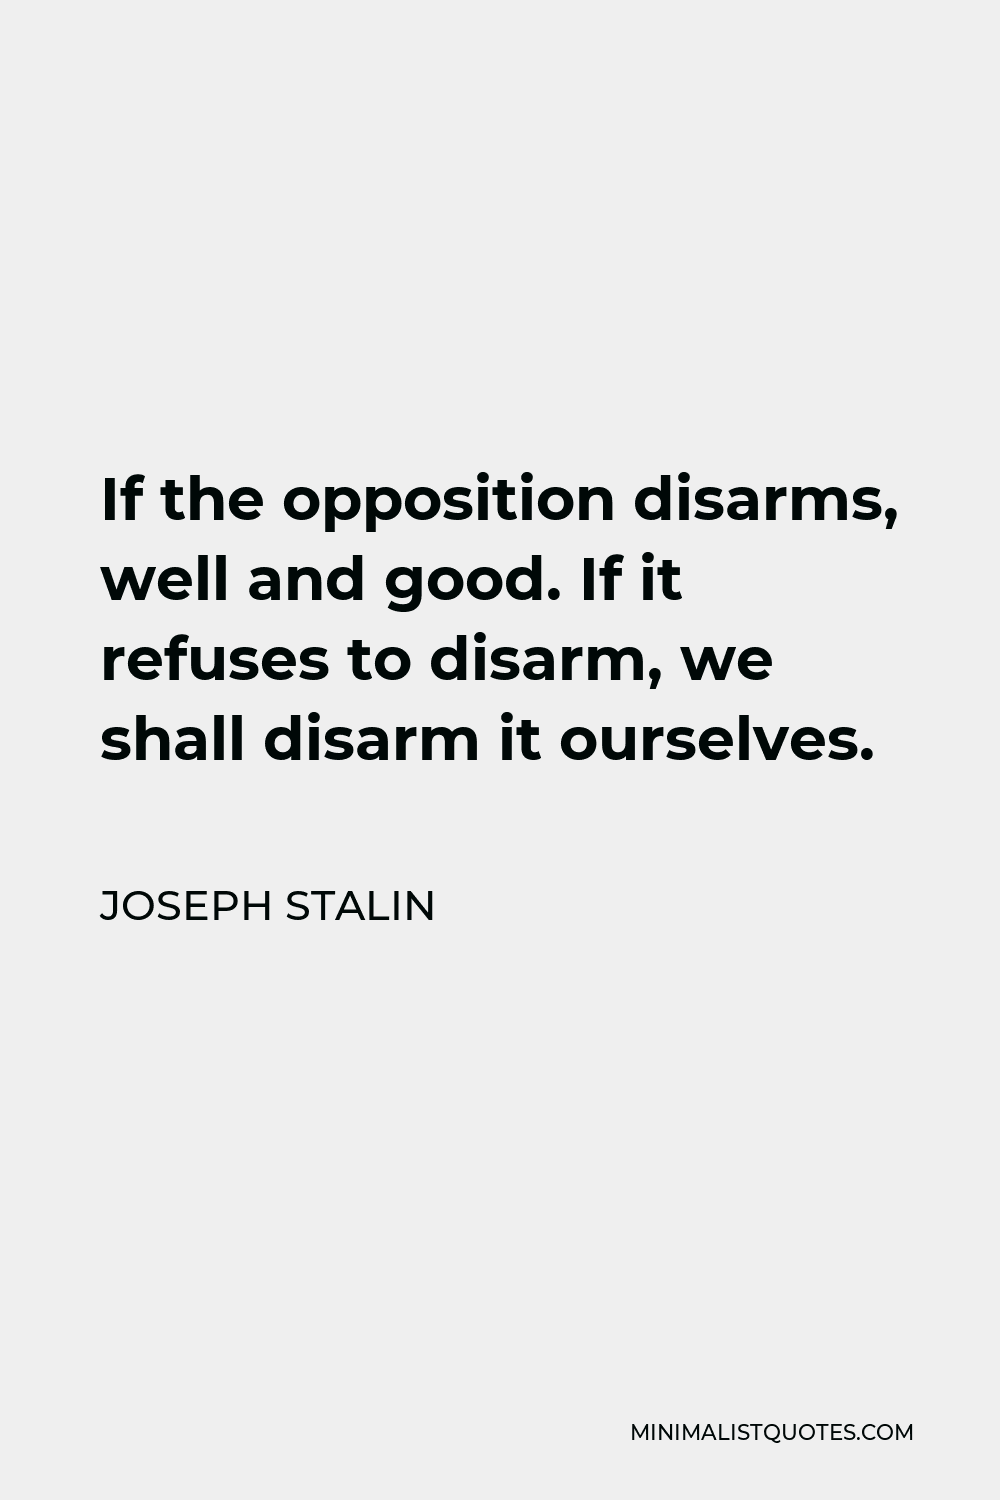 Joseph Stalin Quote - If the opposition disarms, well and good. If it refuses to disarm, we shall disarm it ourselves.